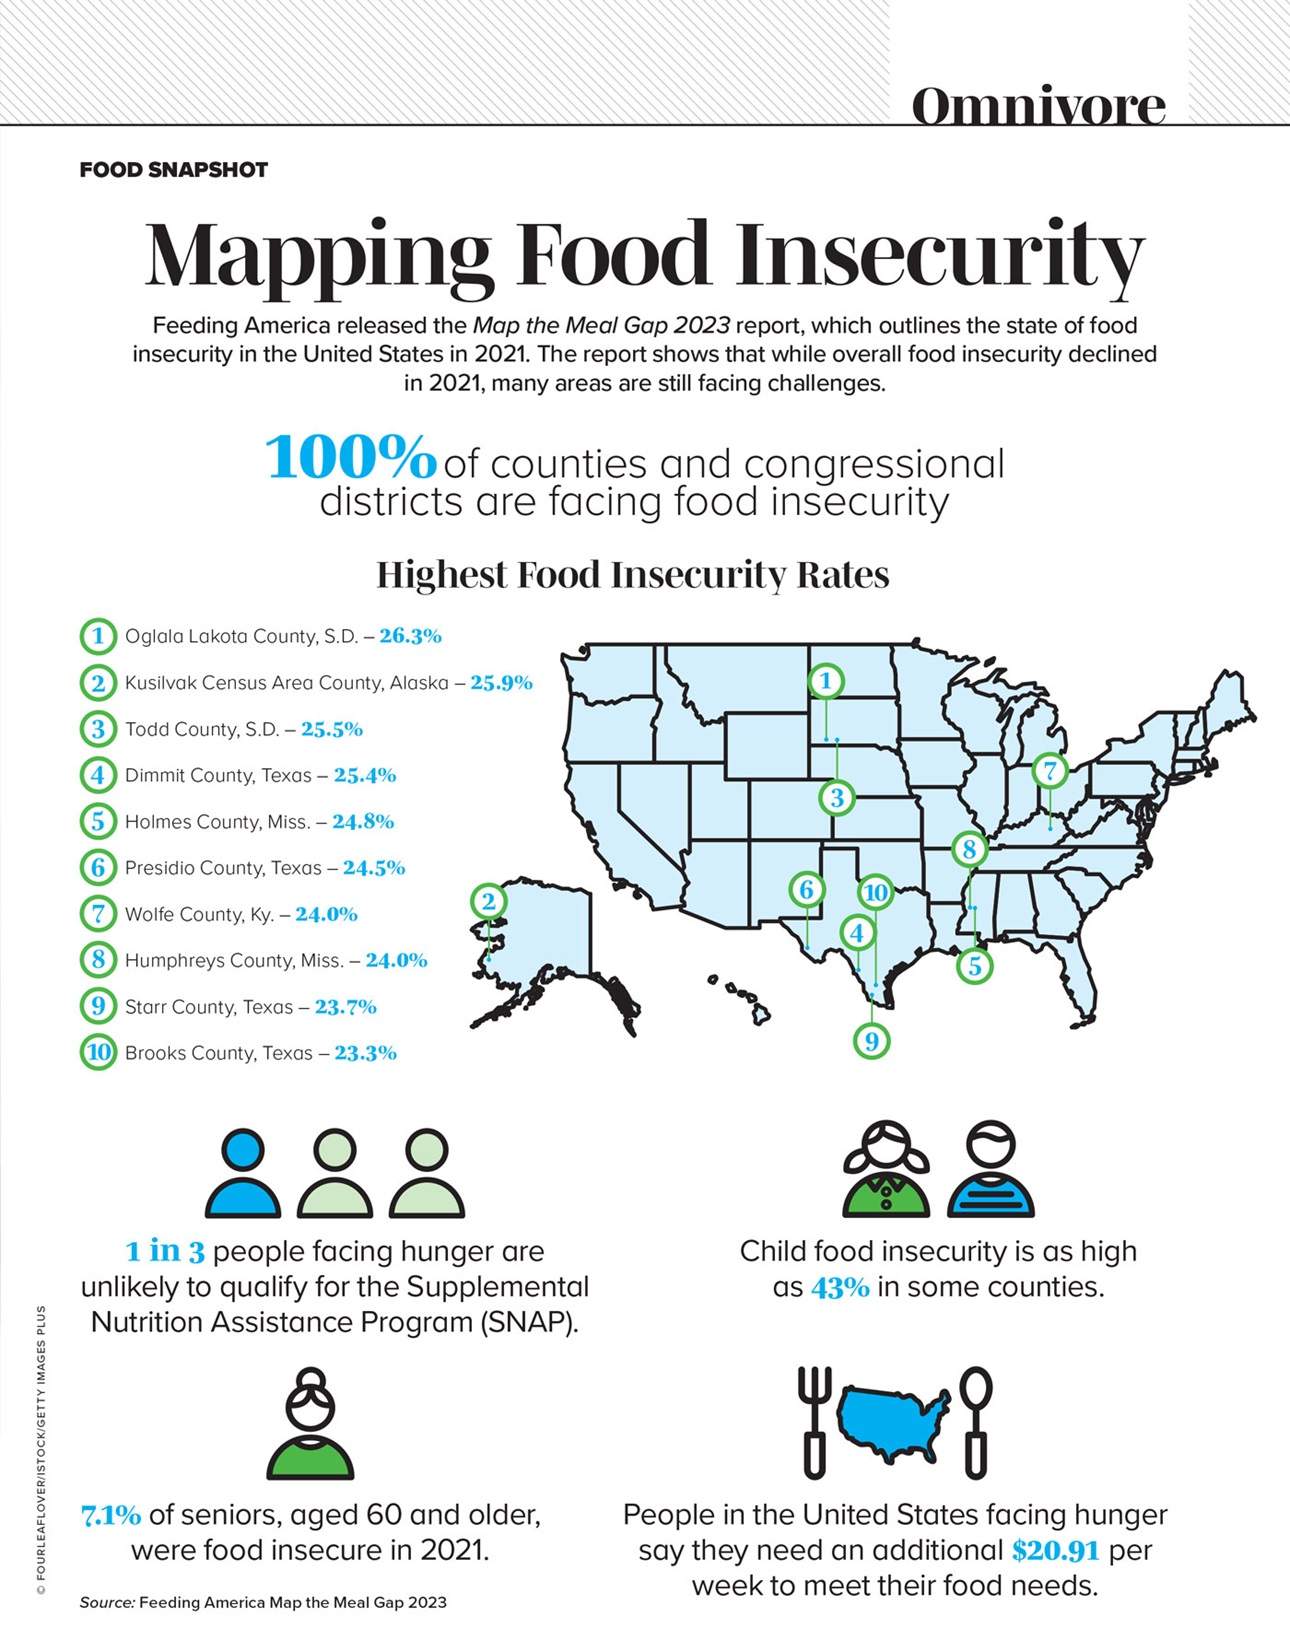 Mapping Food Insecurity